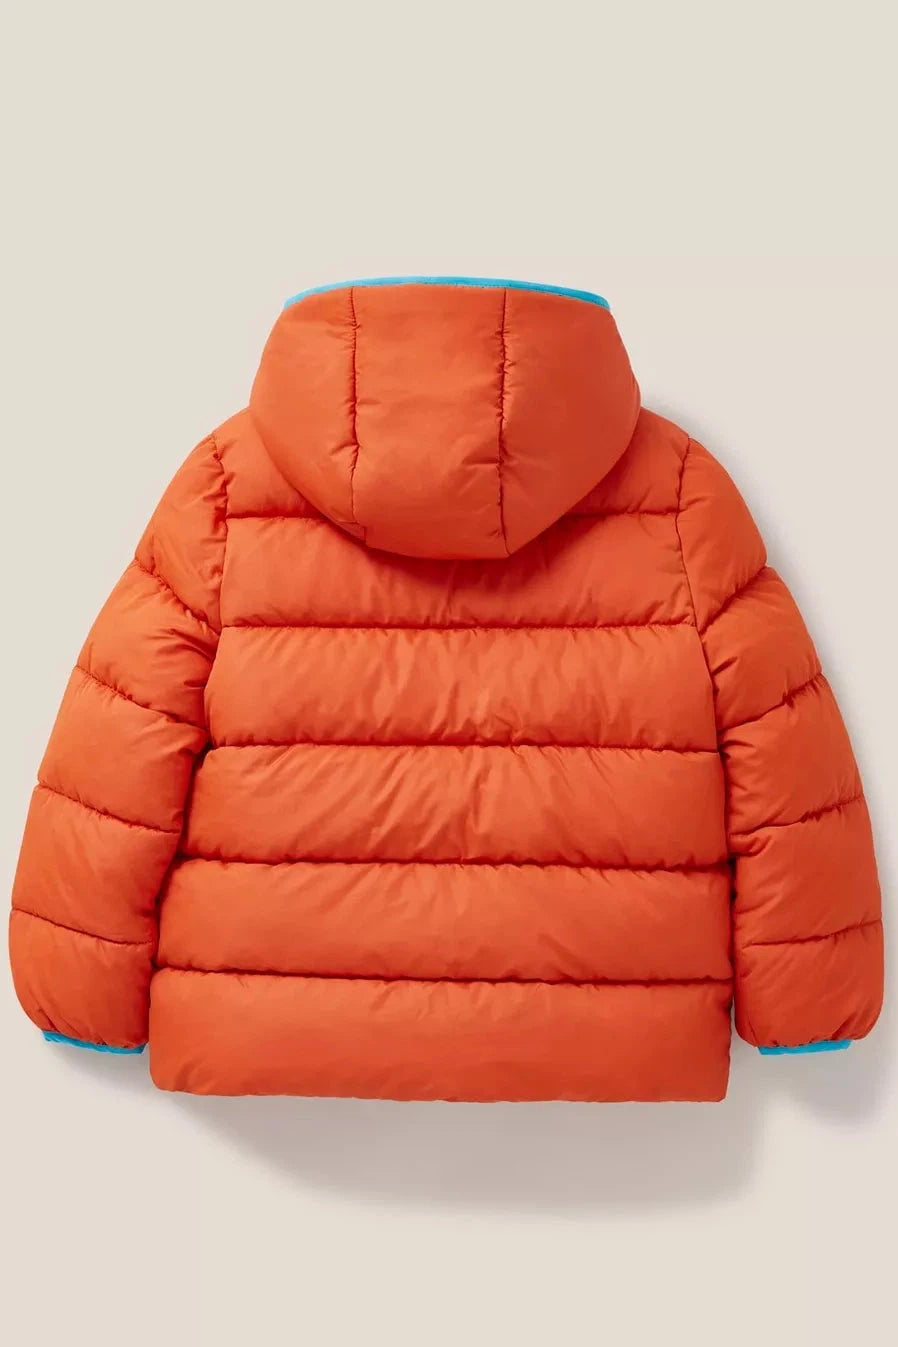 White Stuff Kids Quilted Puffer Jacket-Kids-Ohh! By Gum - Shop Sustainable